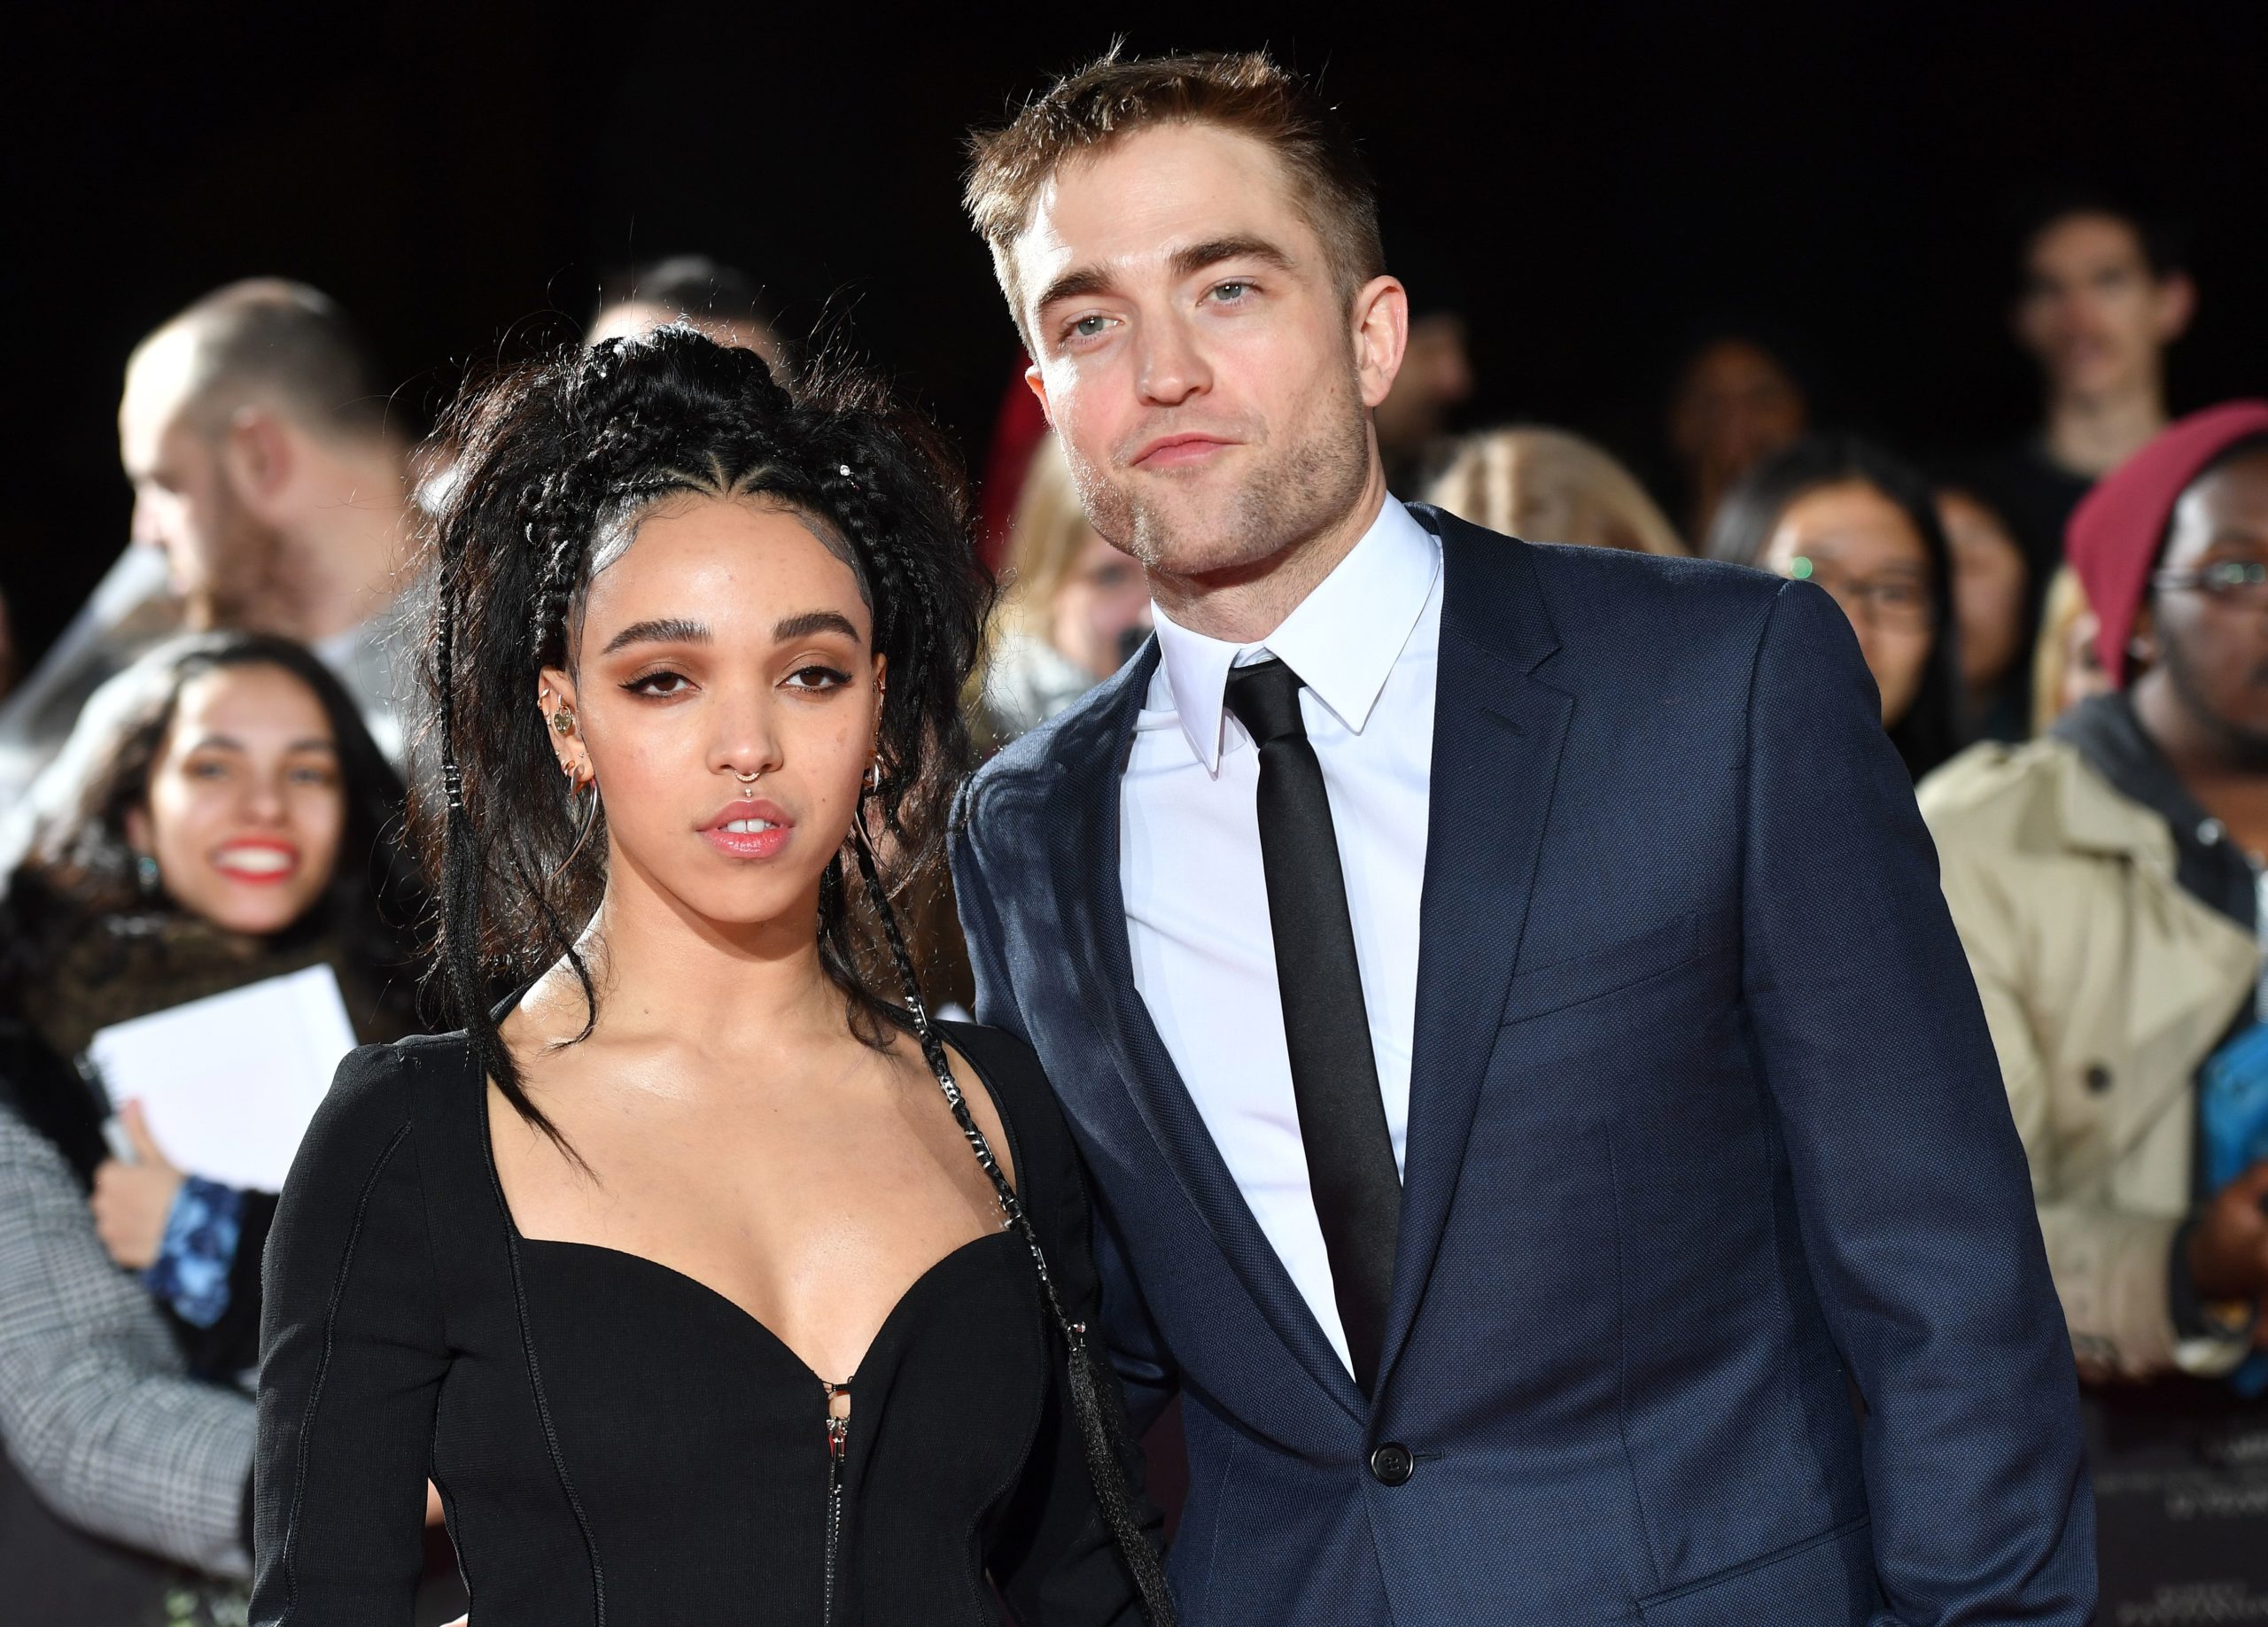 who is fka twigs dating now